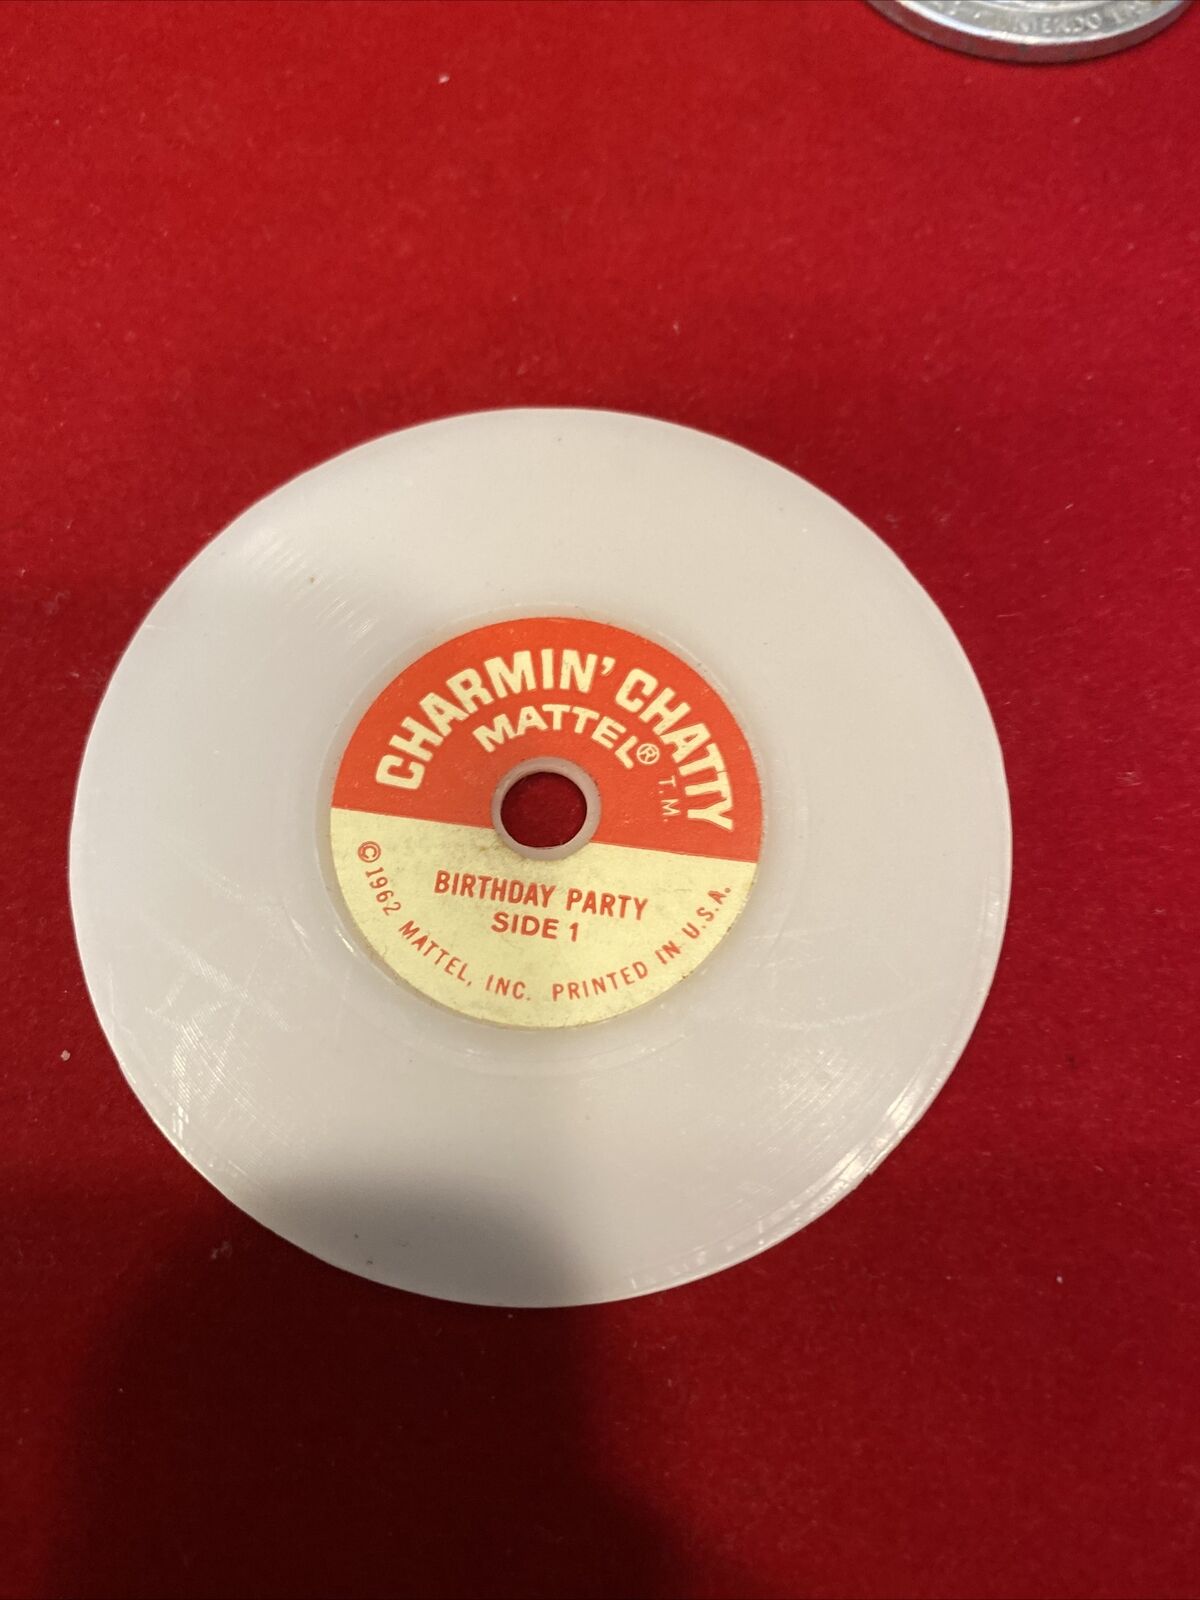 1962 Charmin’ Chatty Record Birthday Party 2 Side